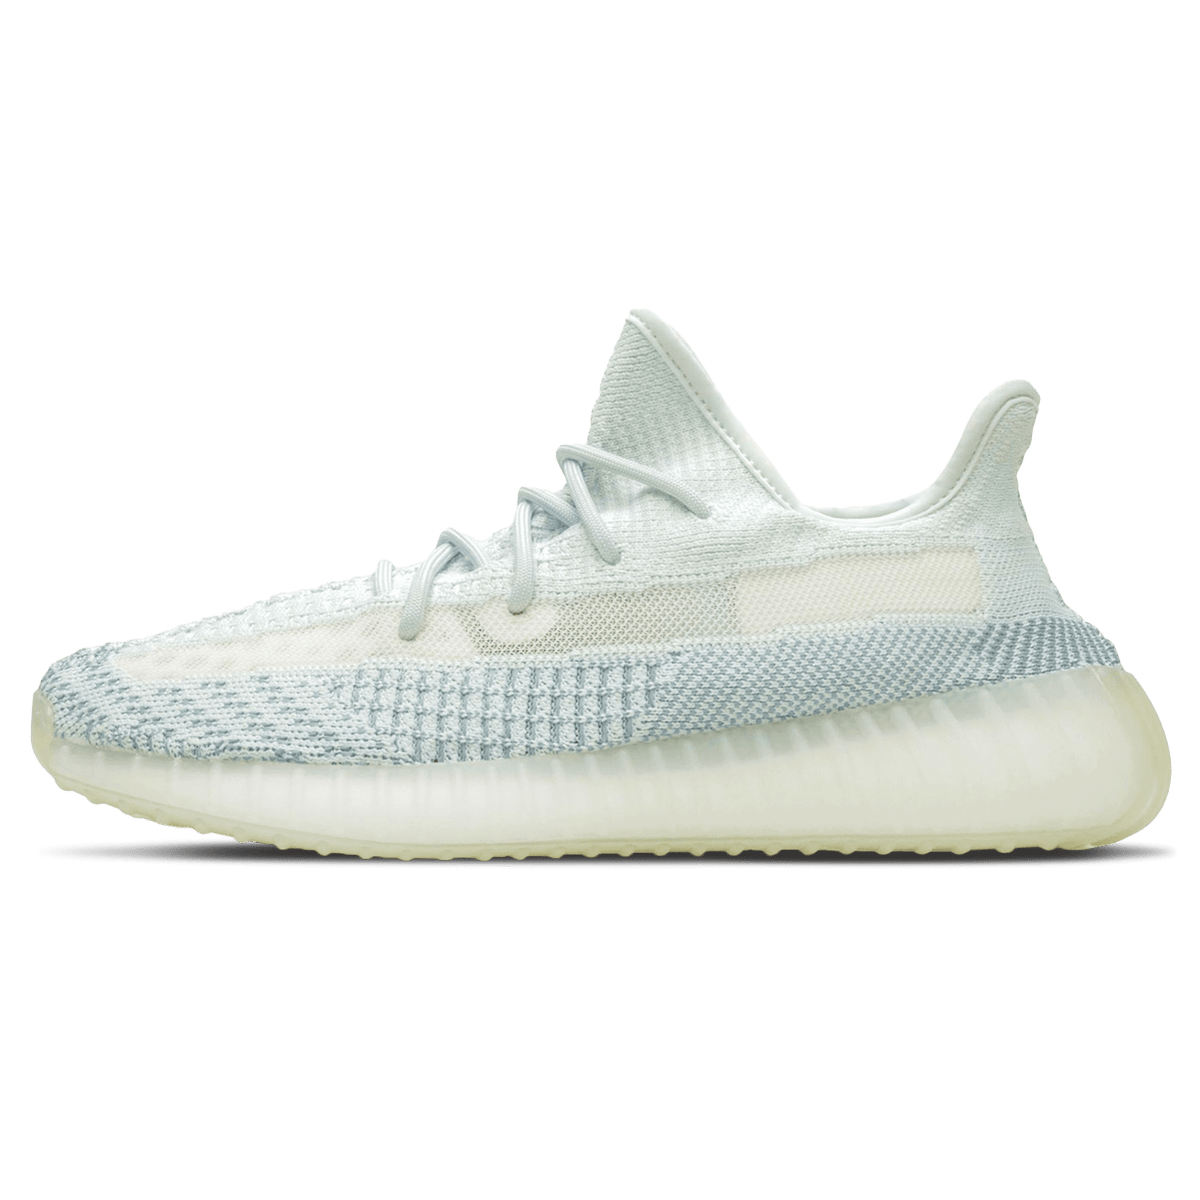 adidas Yeezy Boost 350 V2 'Cloud White Reflective' - CerbeShops